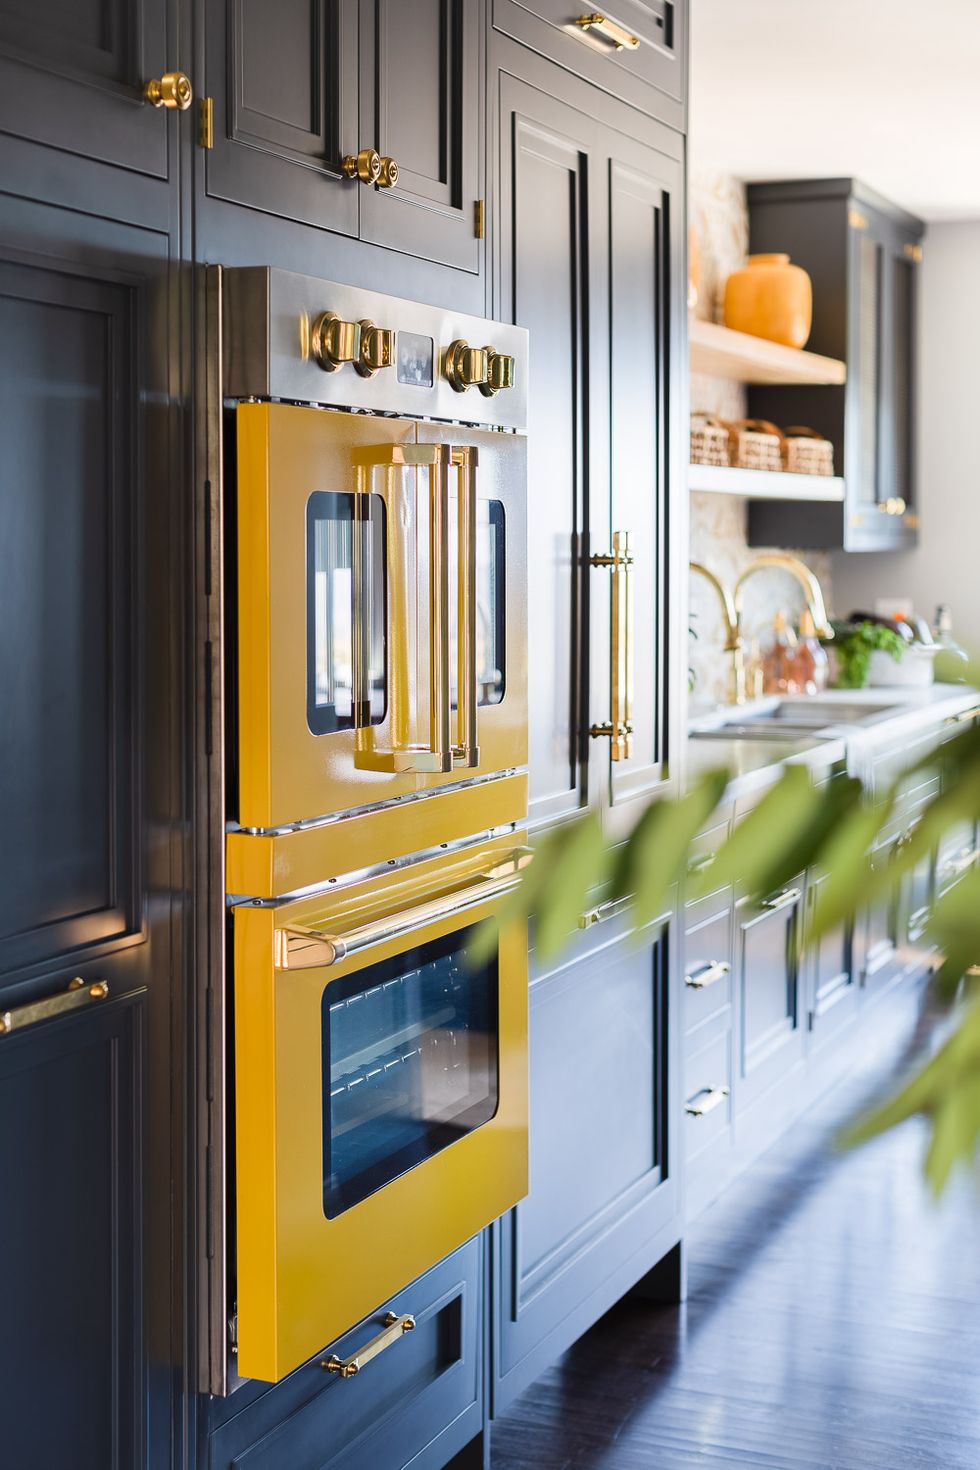 Kitchen, Room, Cabinetry, Countertop, Yellow, Major appliance, Property, Refrigerator, Furniture, Home appliance, 